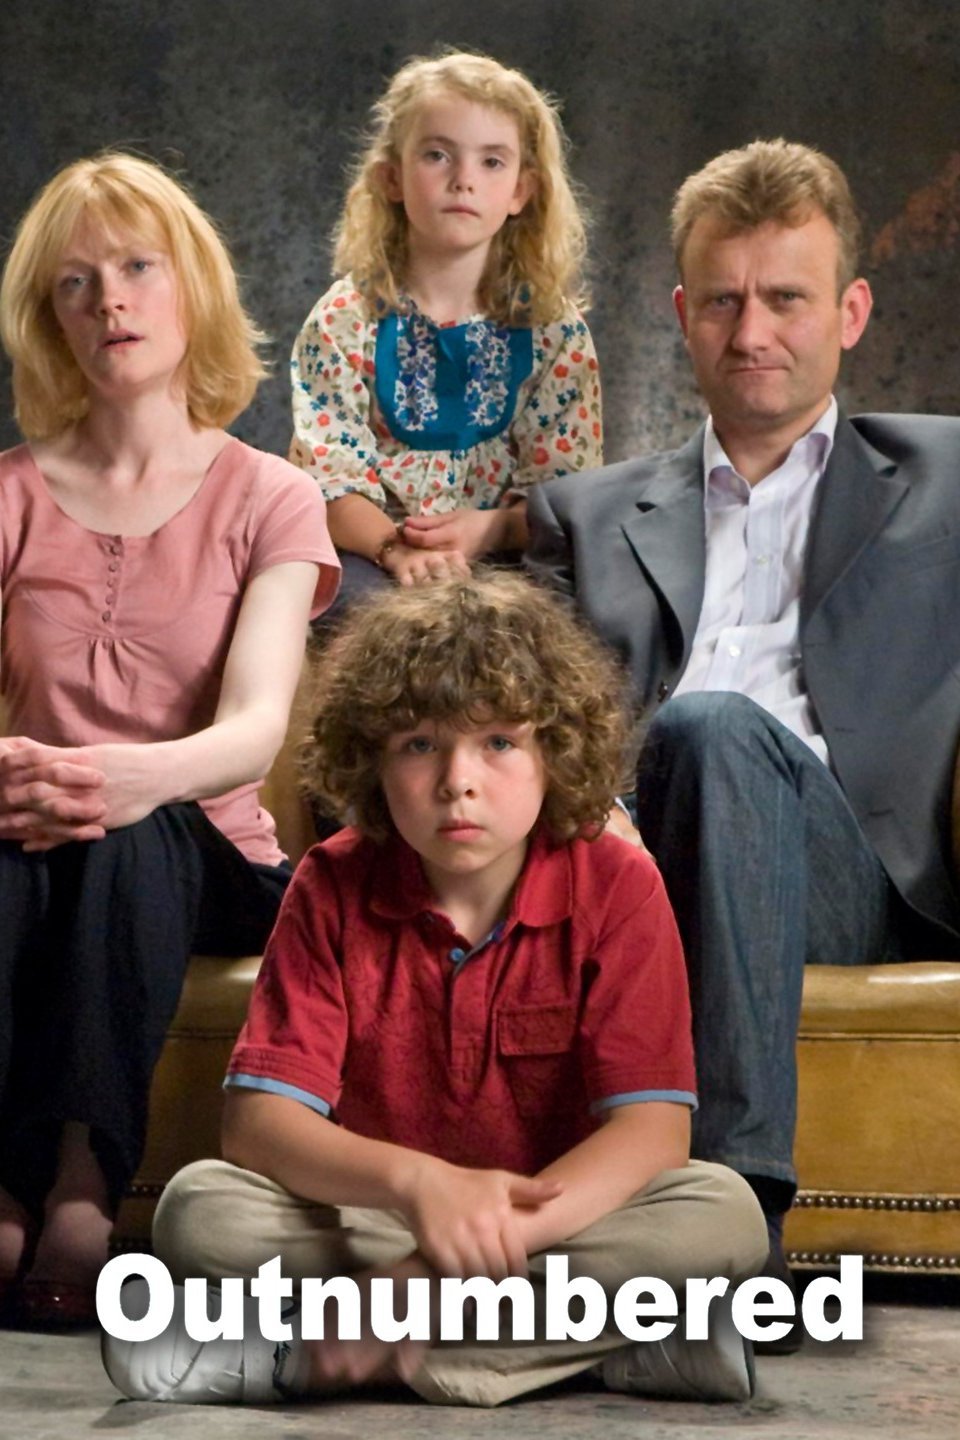 Outnumbered: Season 2 Pictures - Rotten Tomatoes